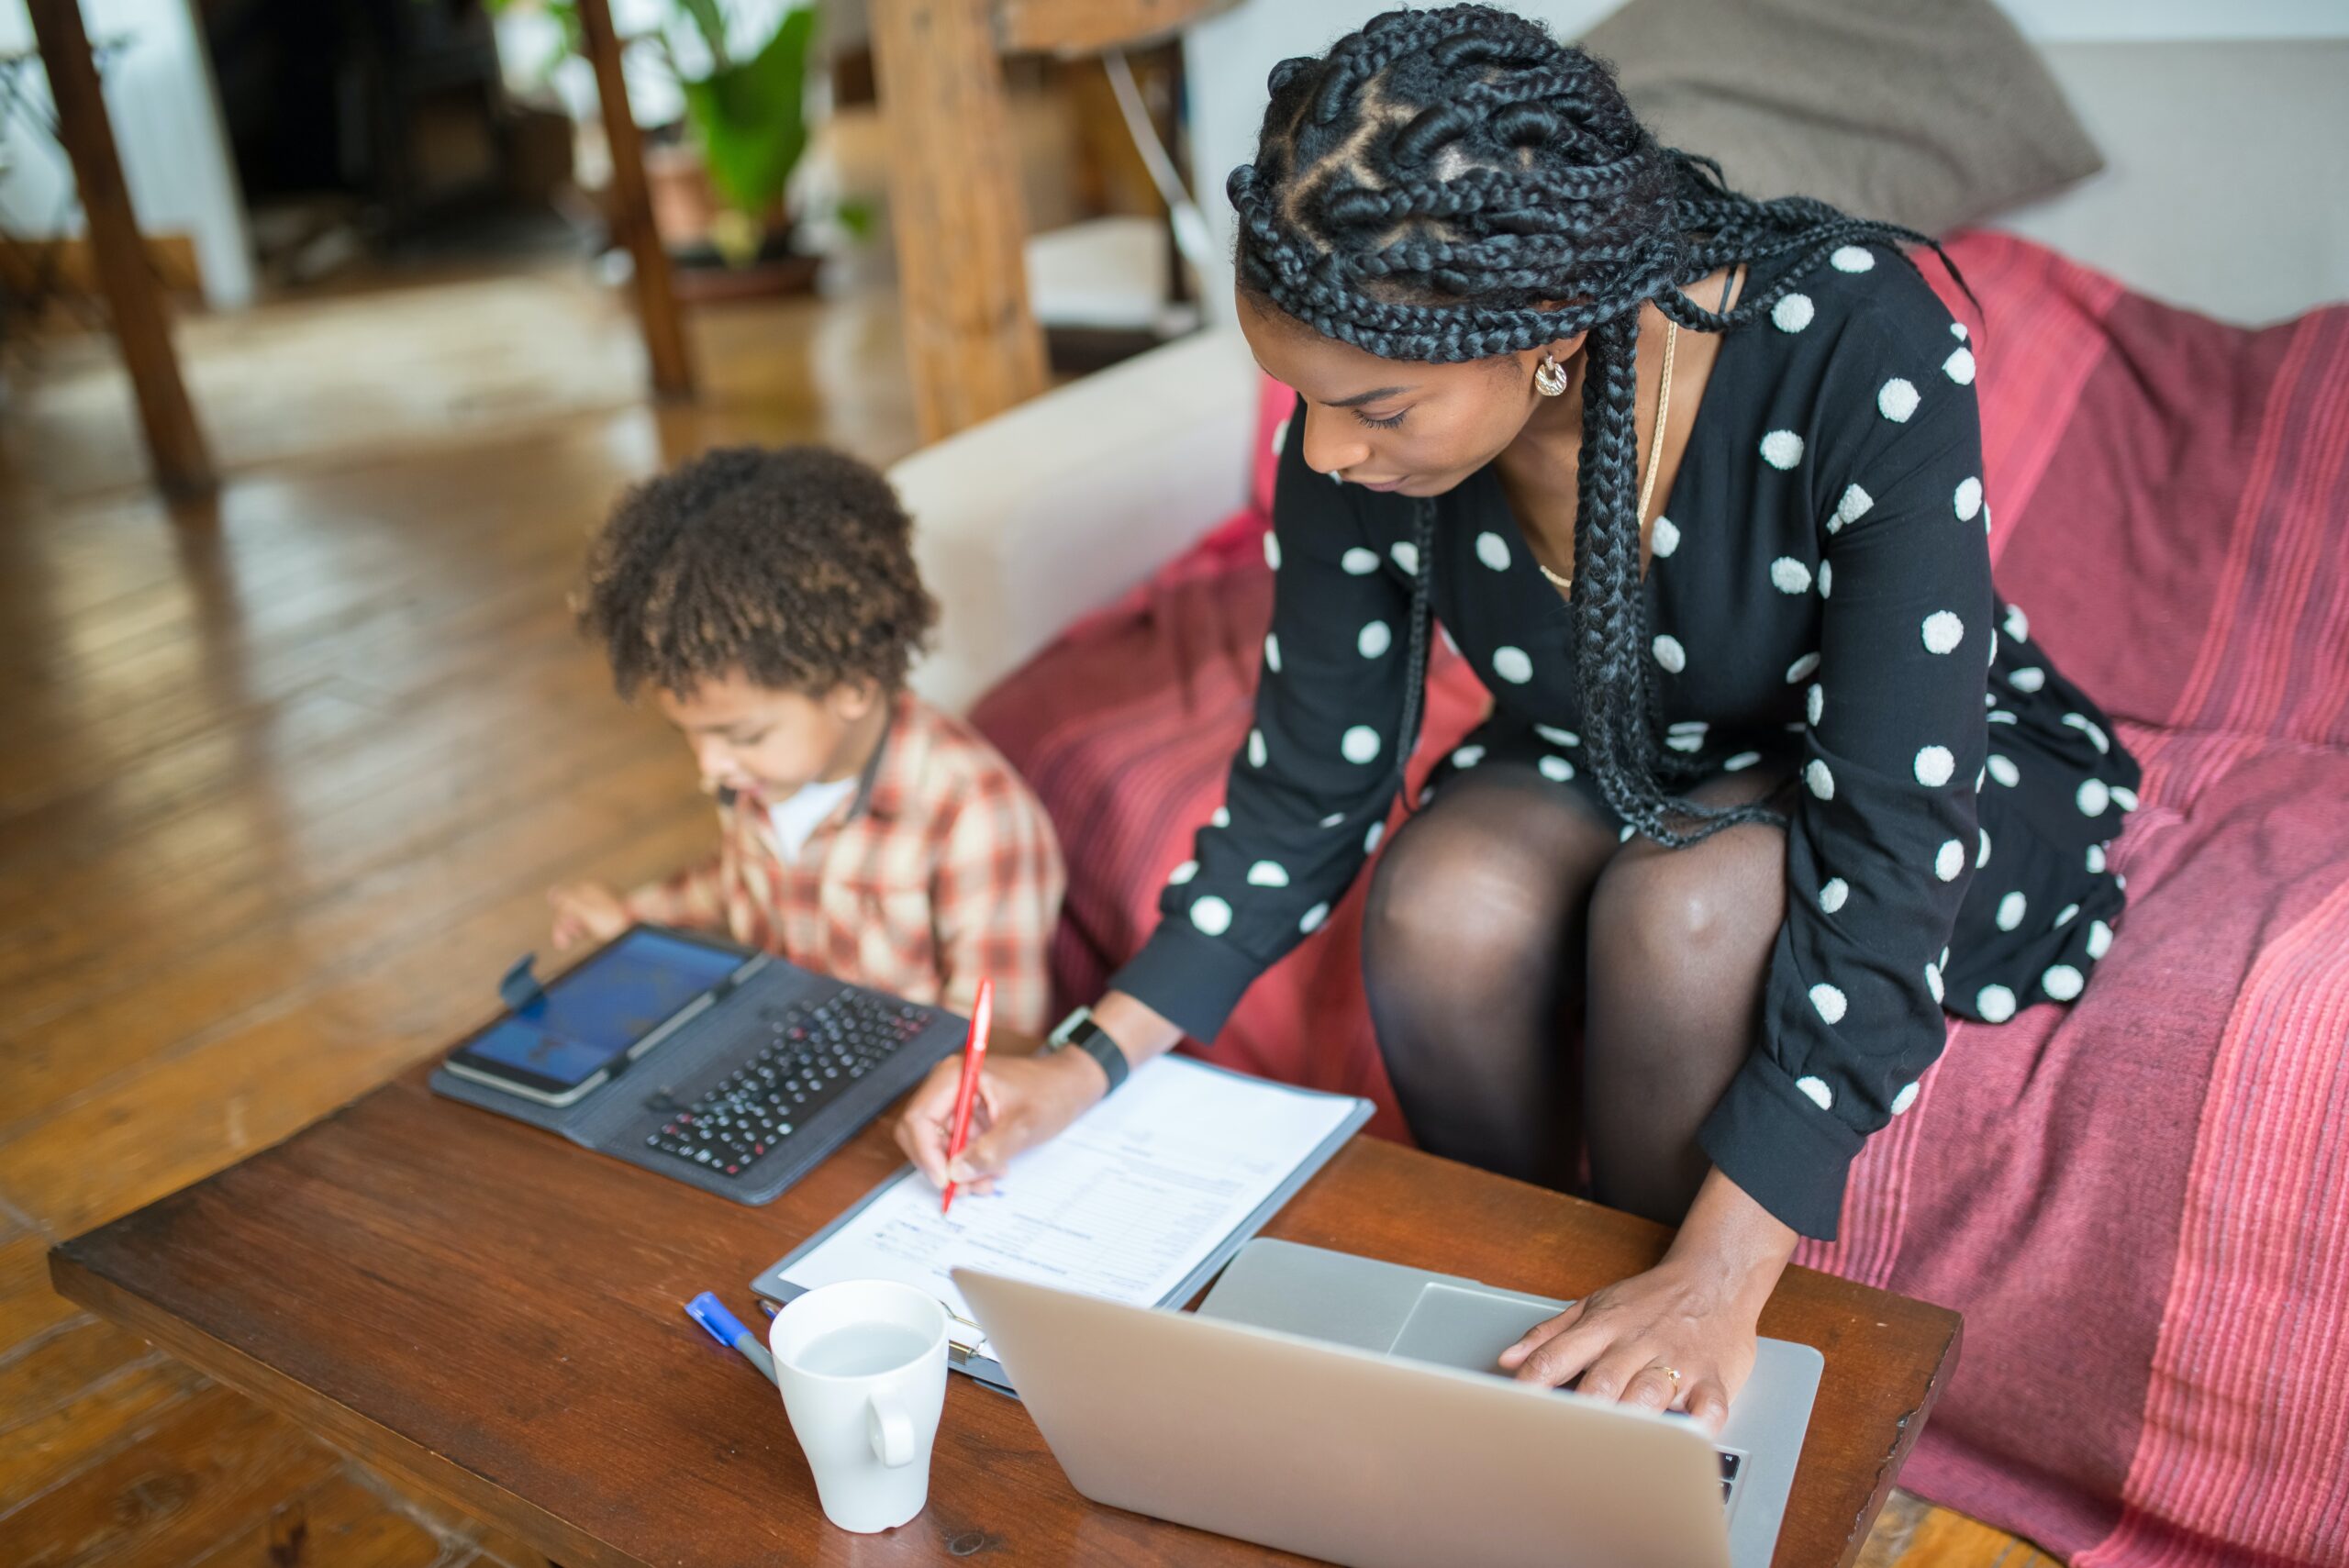 A Mompreneurs Guide: Creating Passive Income with Online Digital Products